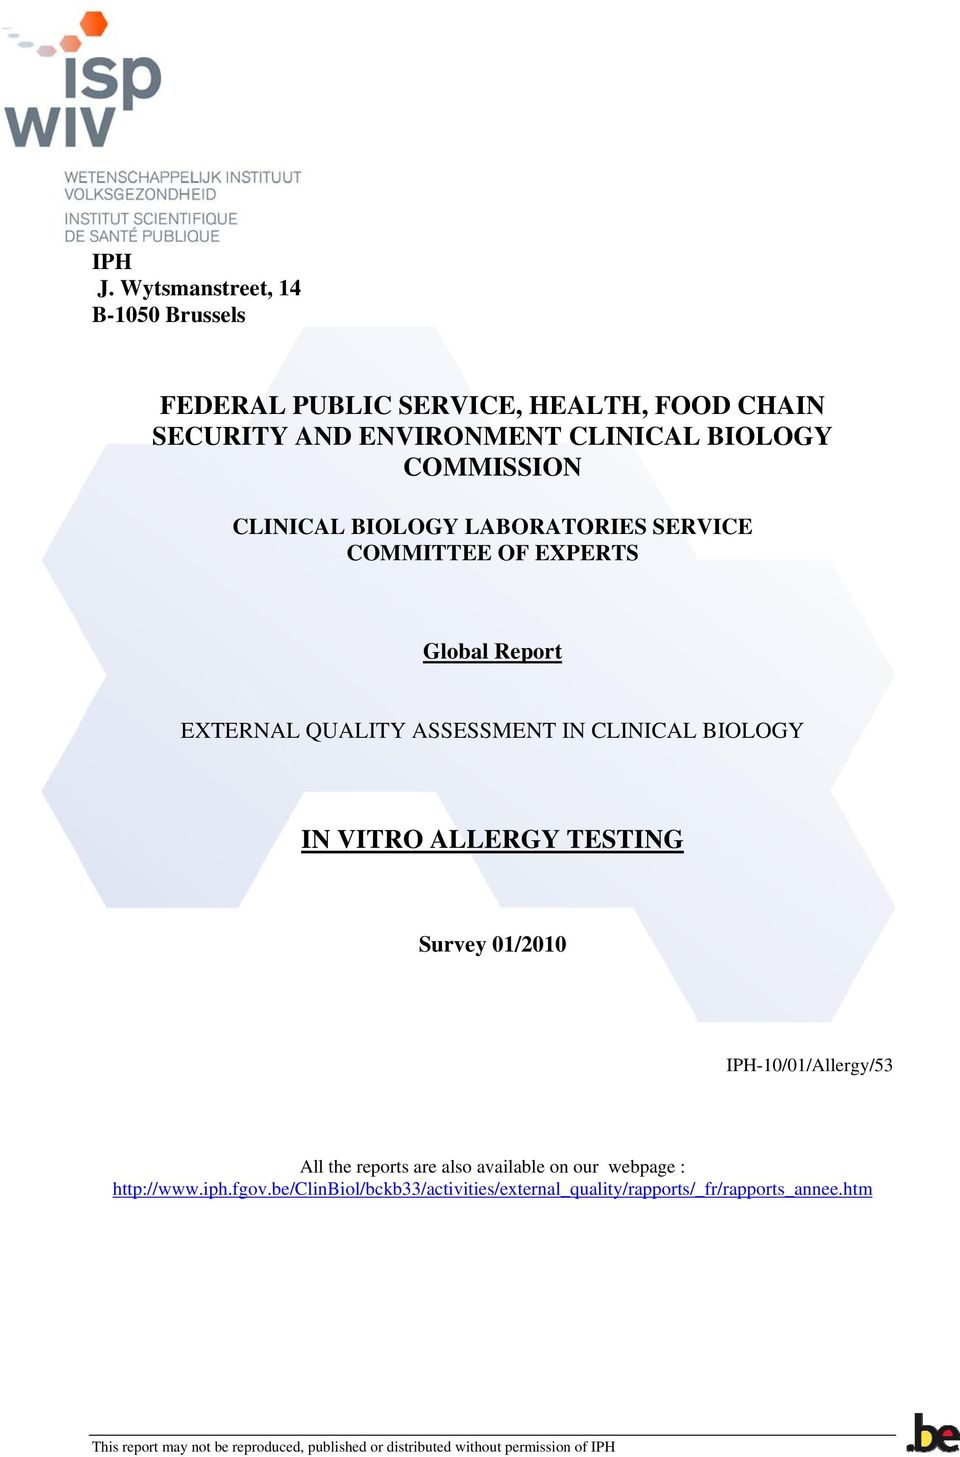 BIOLOGY LABORATORIES SERVICE COMMITTEE OF EXPERTS Global Report EXTERNAL QUALITY ASSESSMENT IN CLINICAL BIOLOGY IN VITRO ALLERGY TESTING